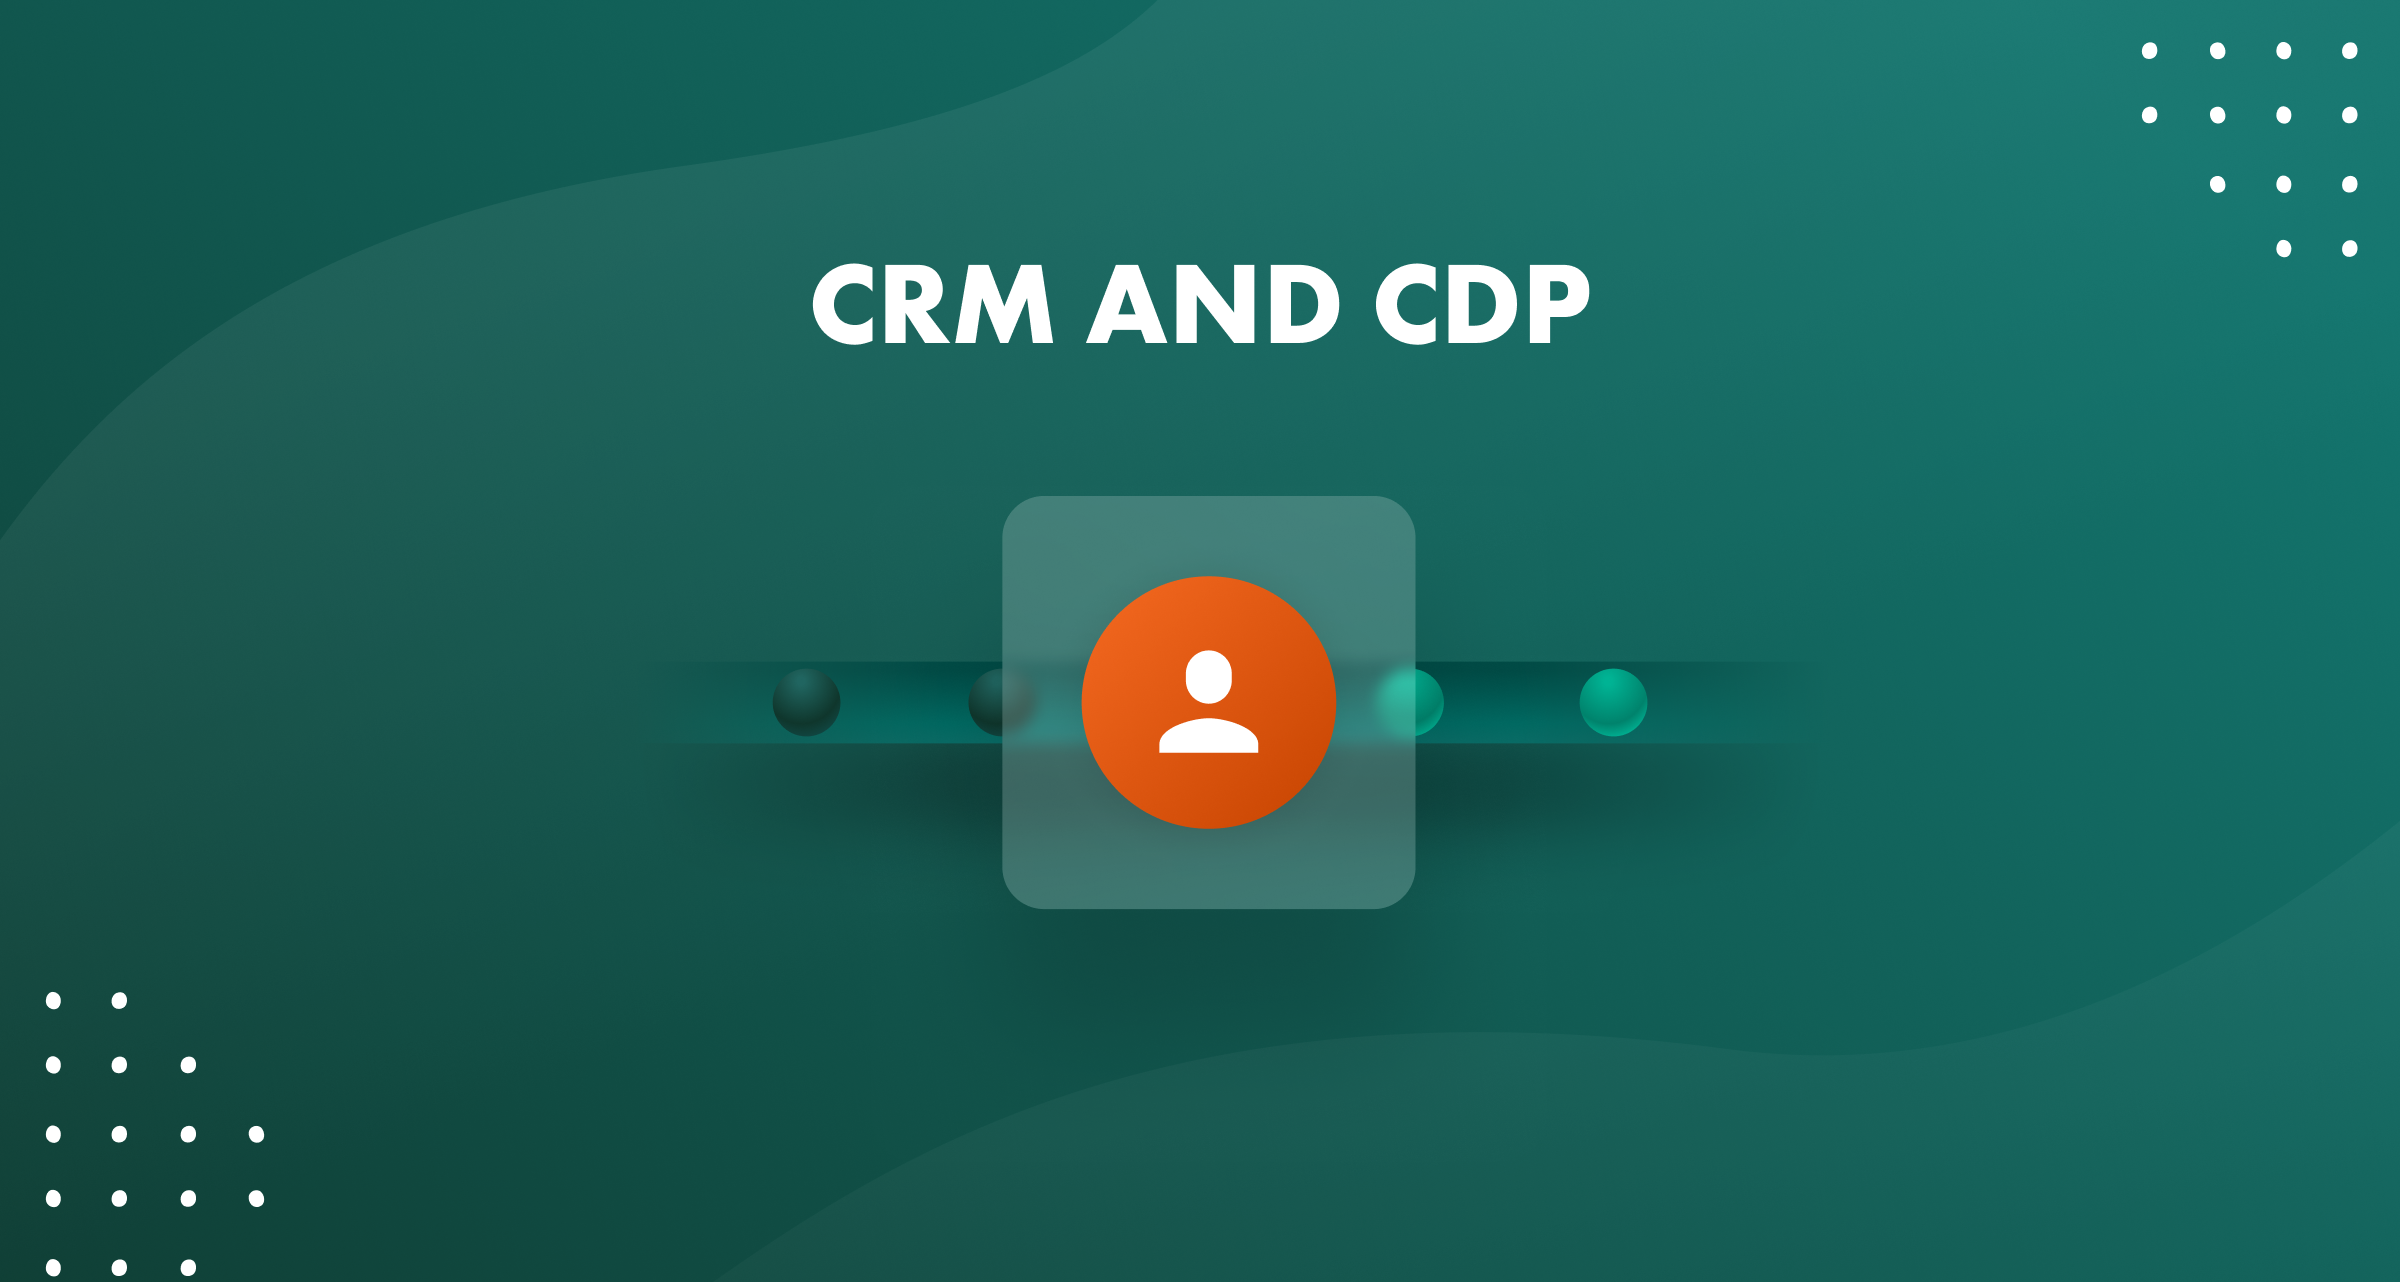 CRM and CDP